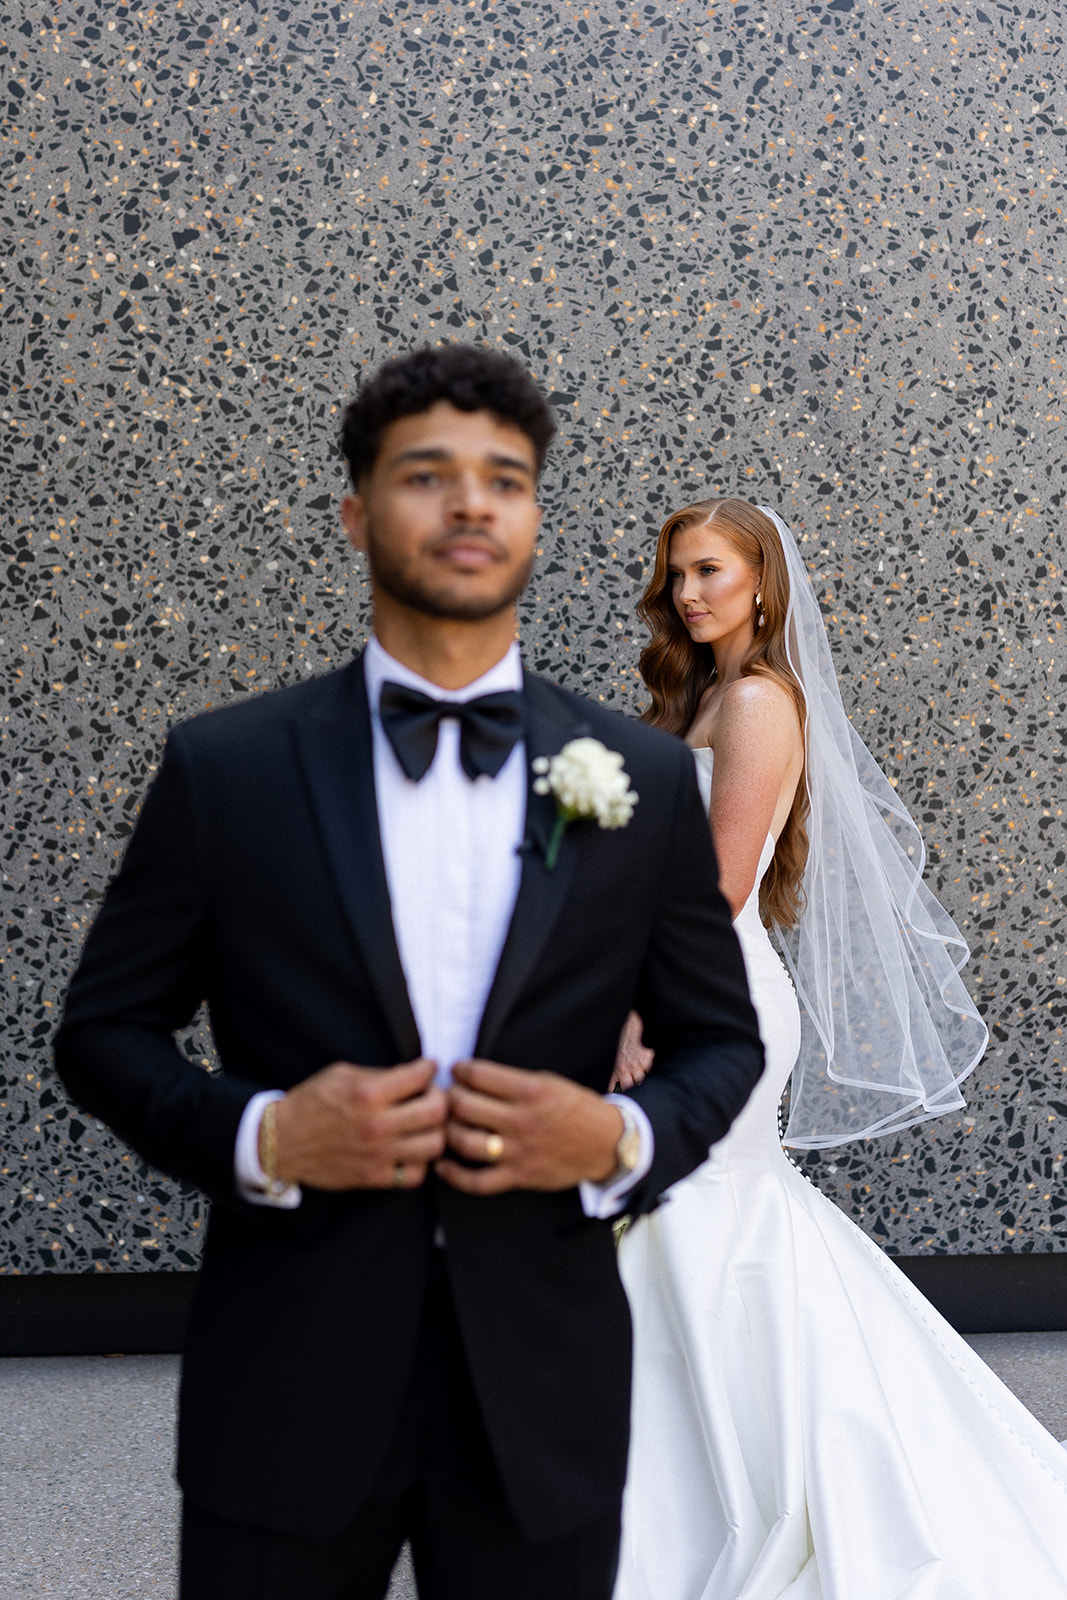 Benefits of Hiring a Wedding Photographer & Videographer For Your St. Louis Wedding